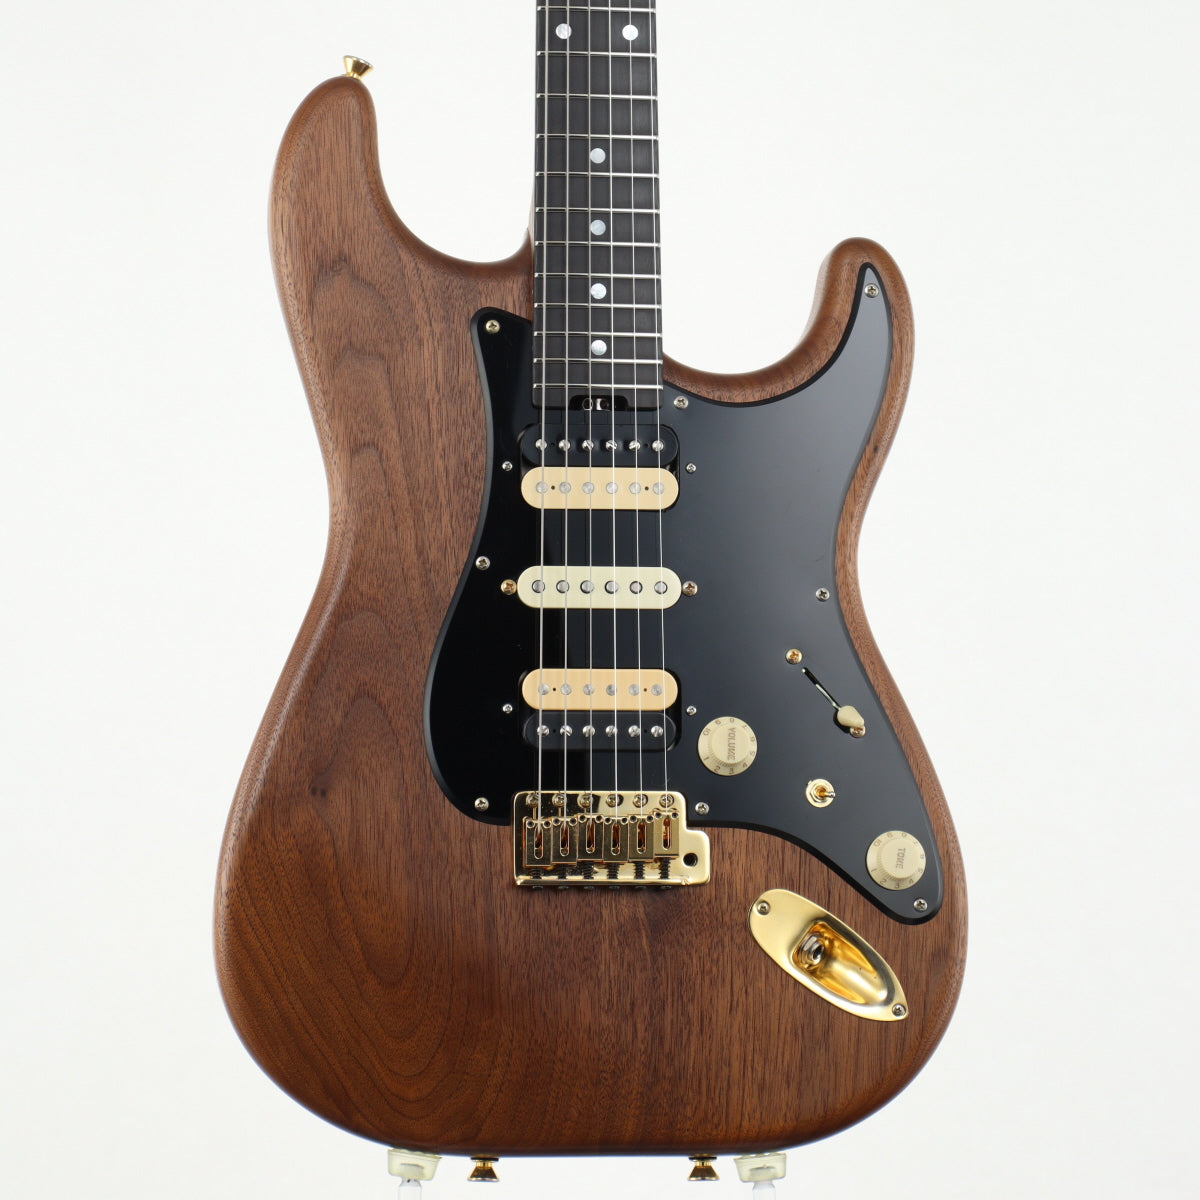 [SN 060815] USED SCHECTER / PW-ST-WAL MOD Natural [12]